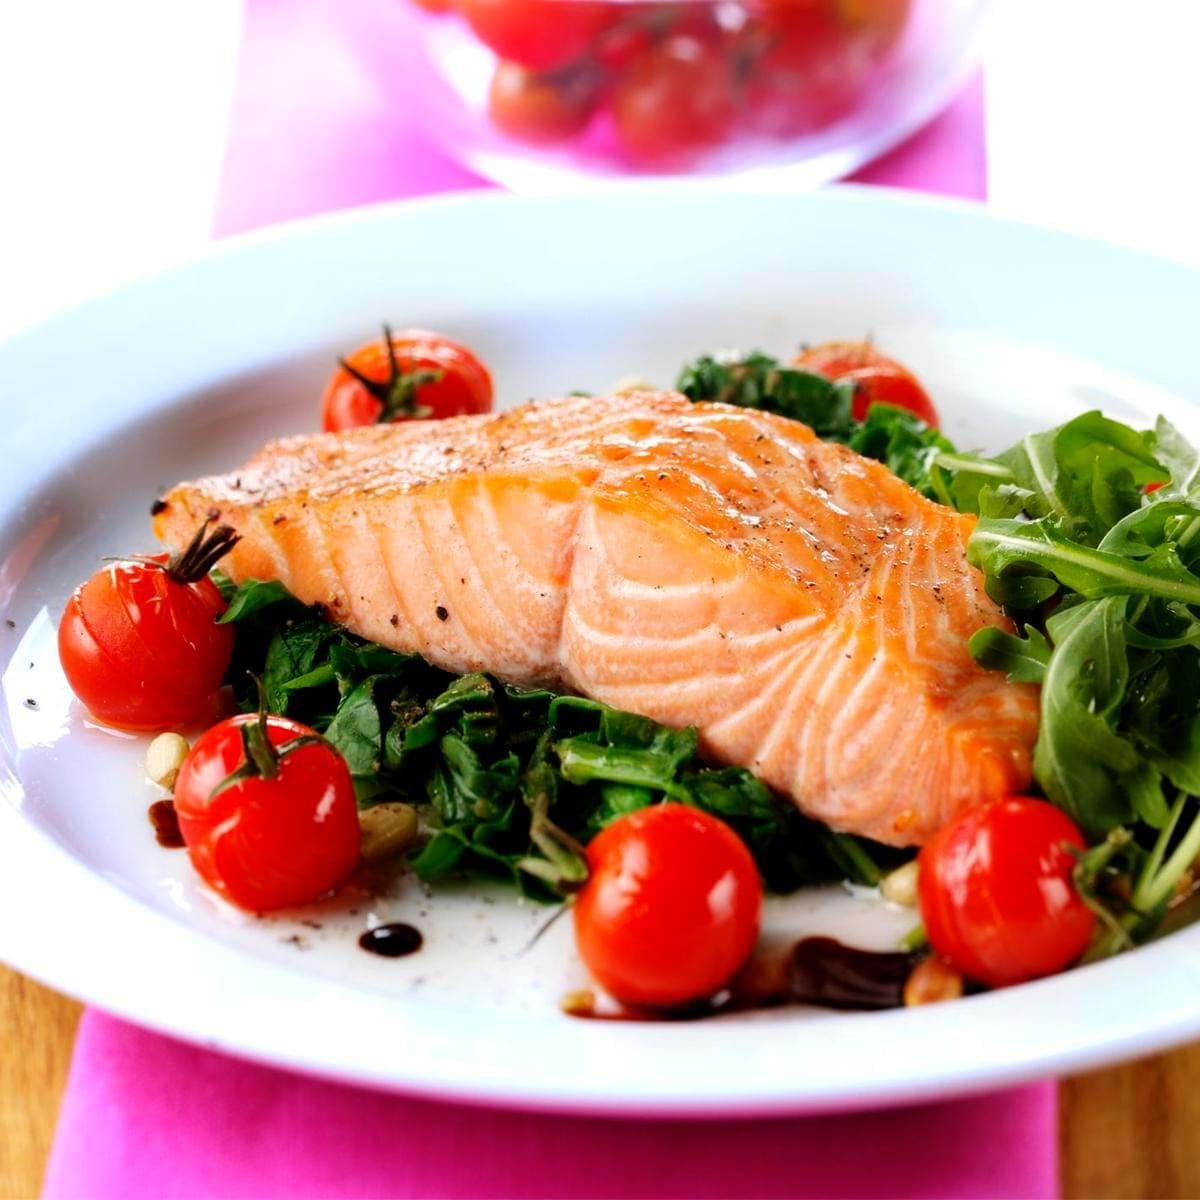 Salmon is a good source of vitamin D